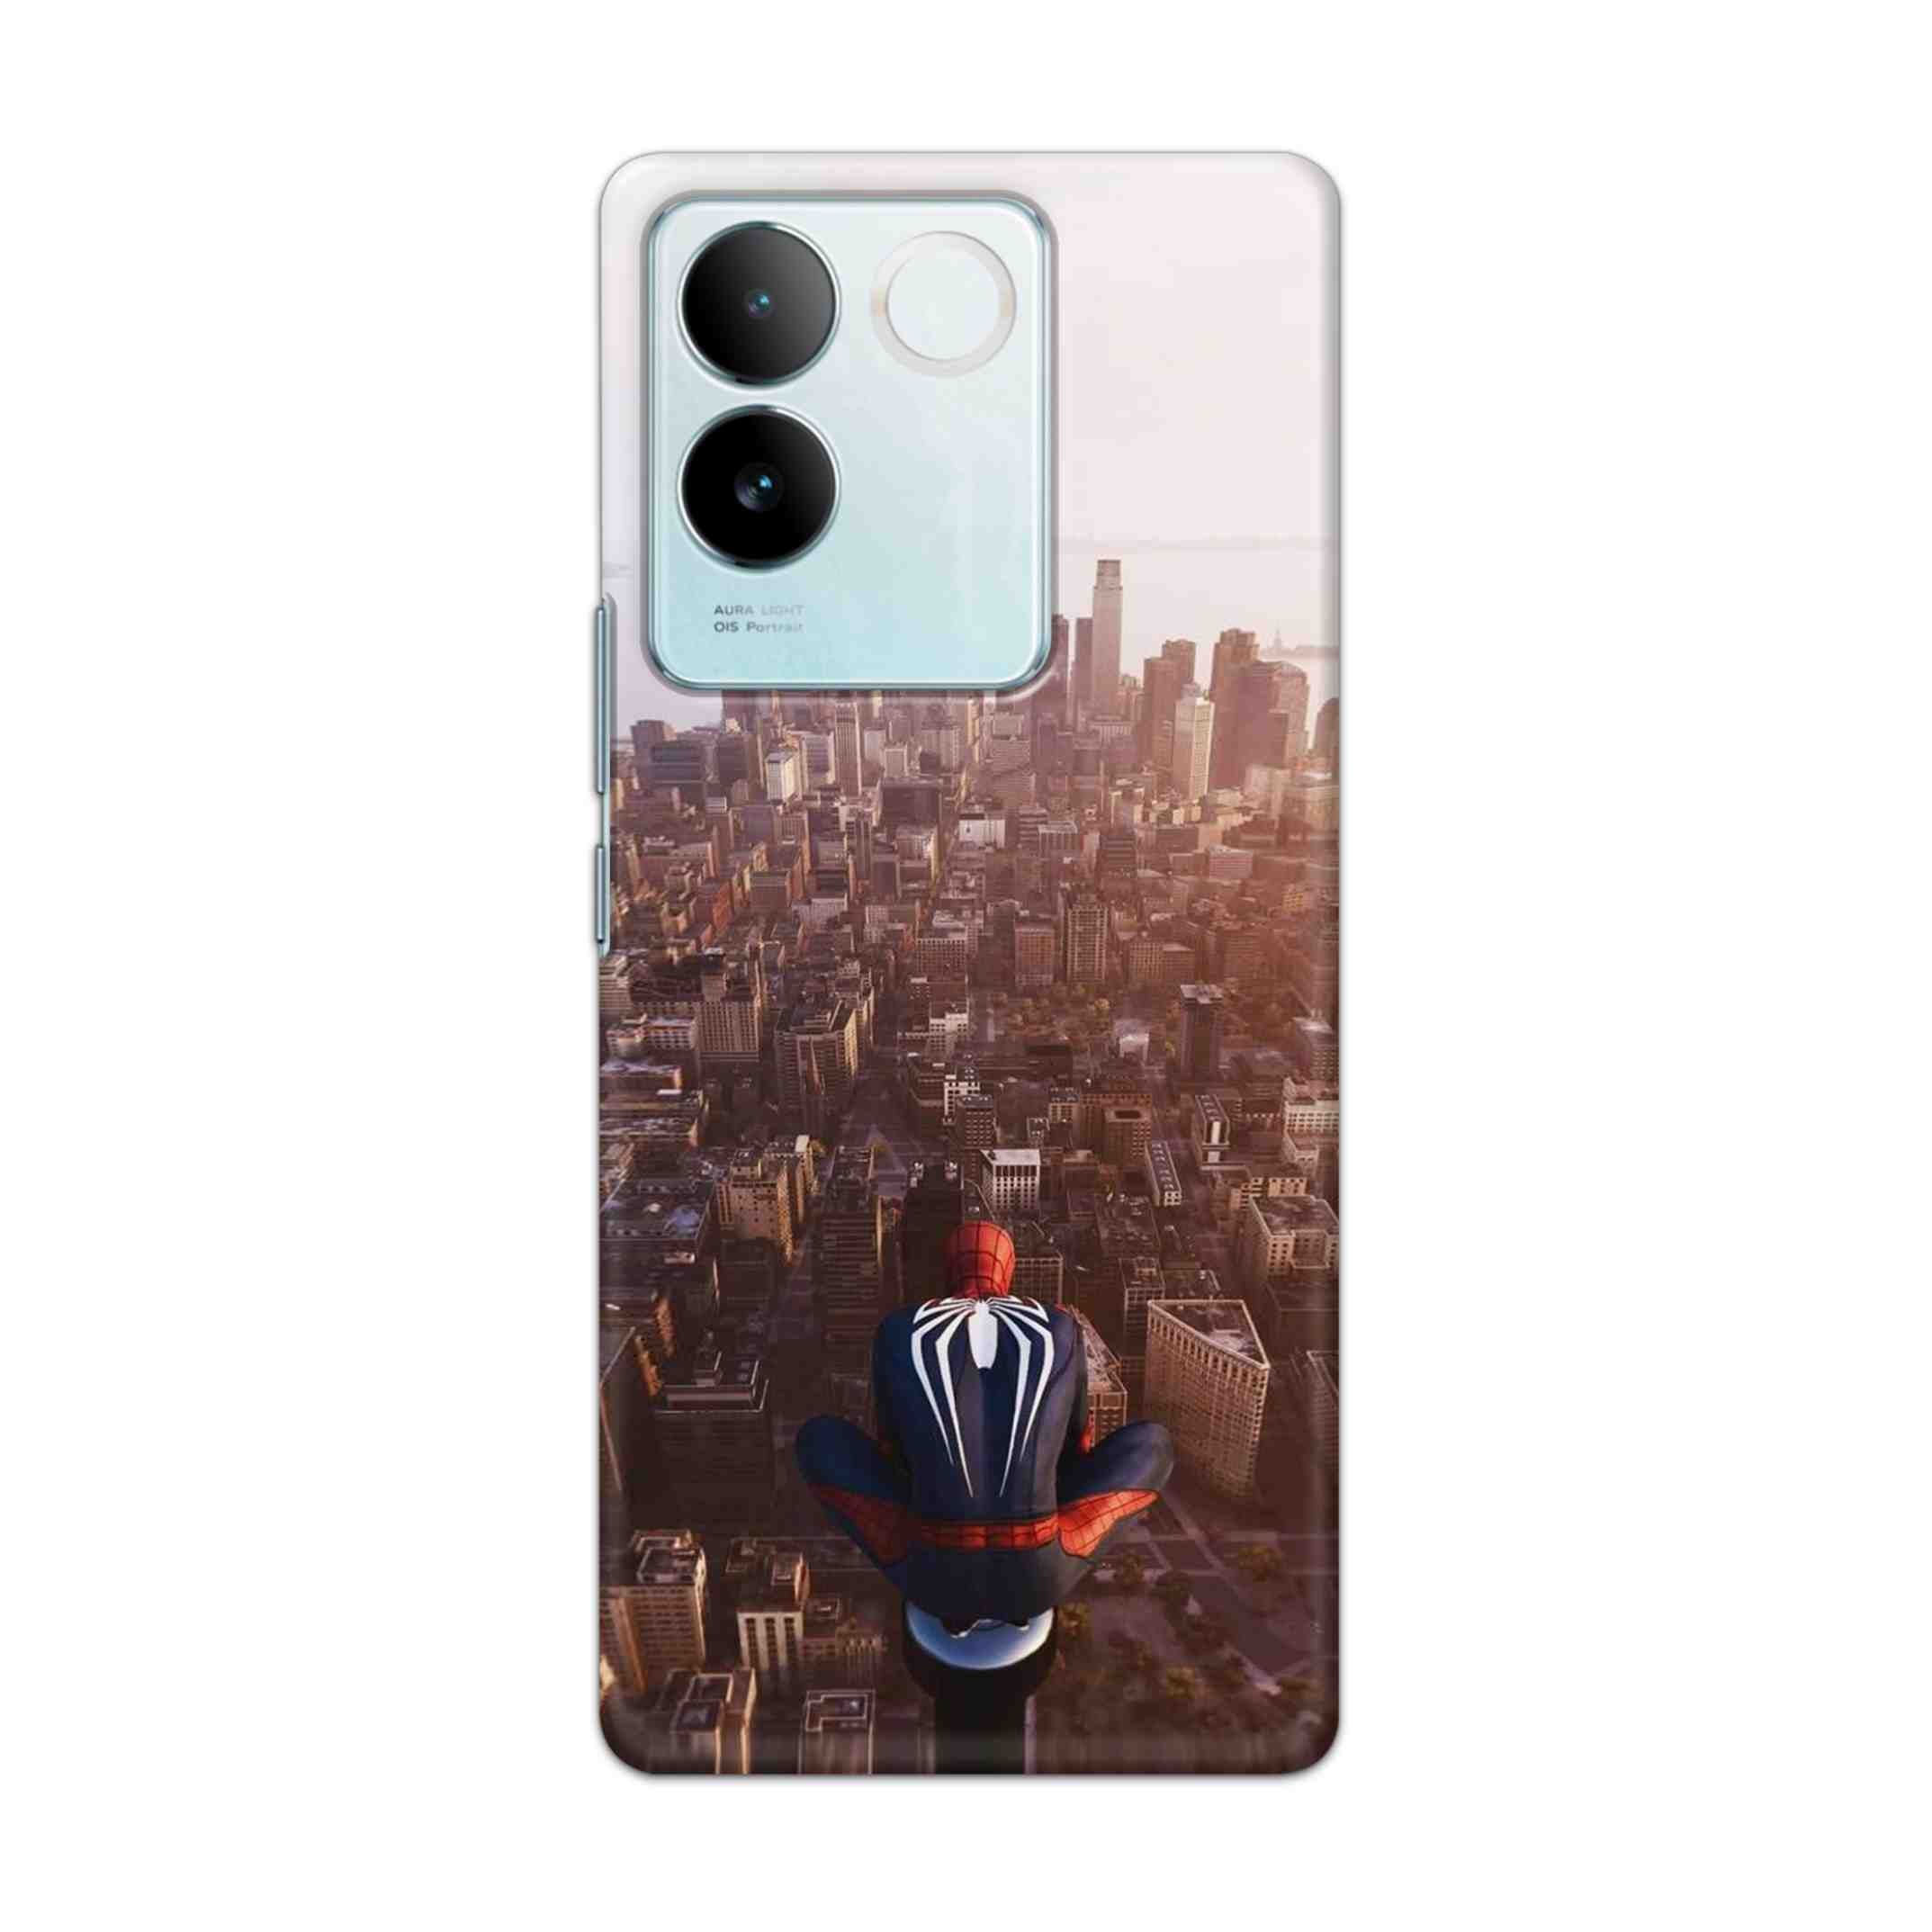 Buy City Of Spiderman Hard Back Mobile Phone Case/Cover For iQOO Z7 Pro (5G) Online